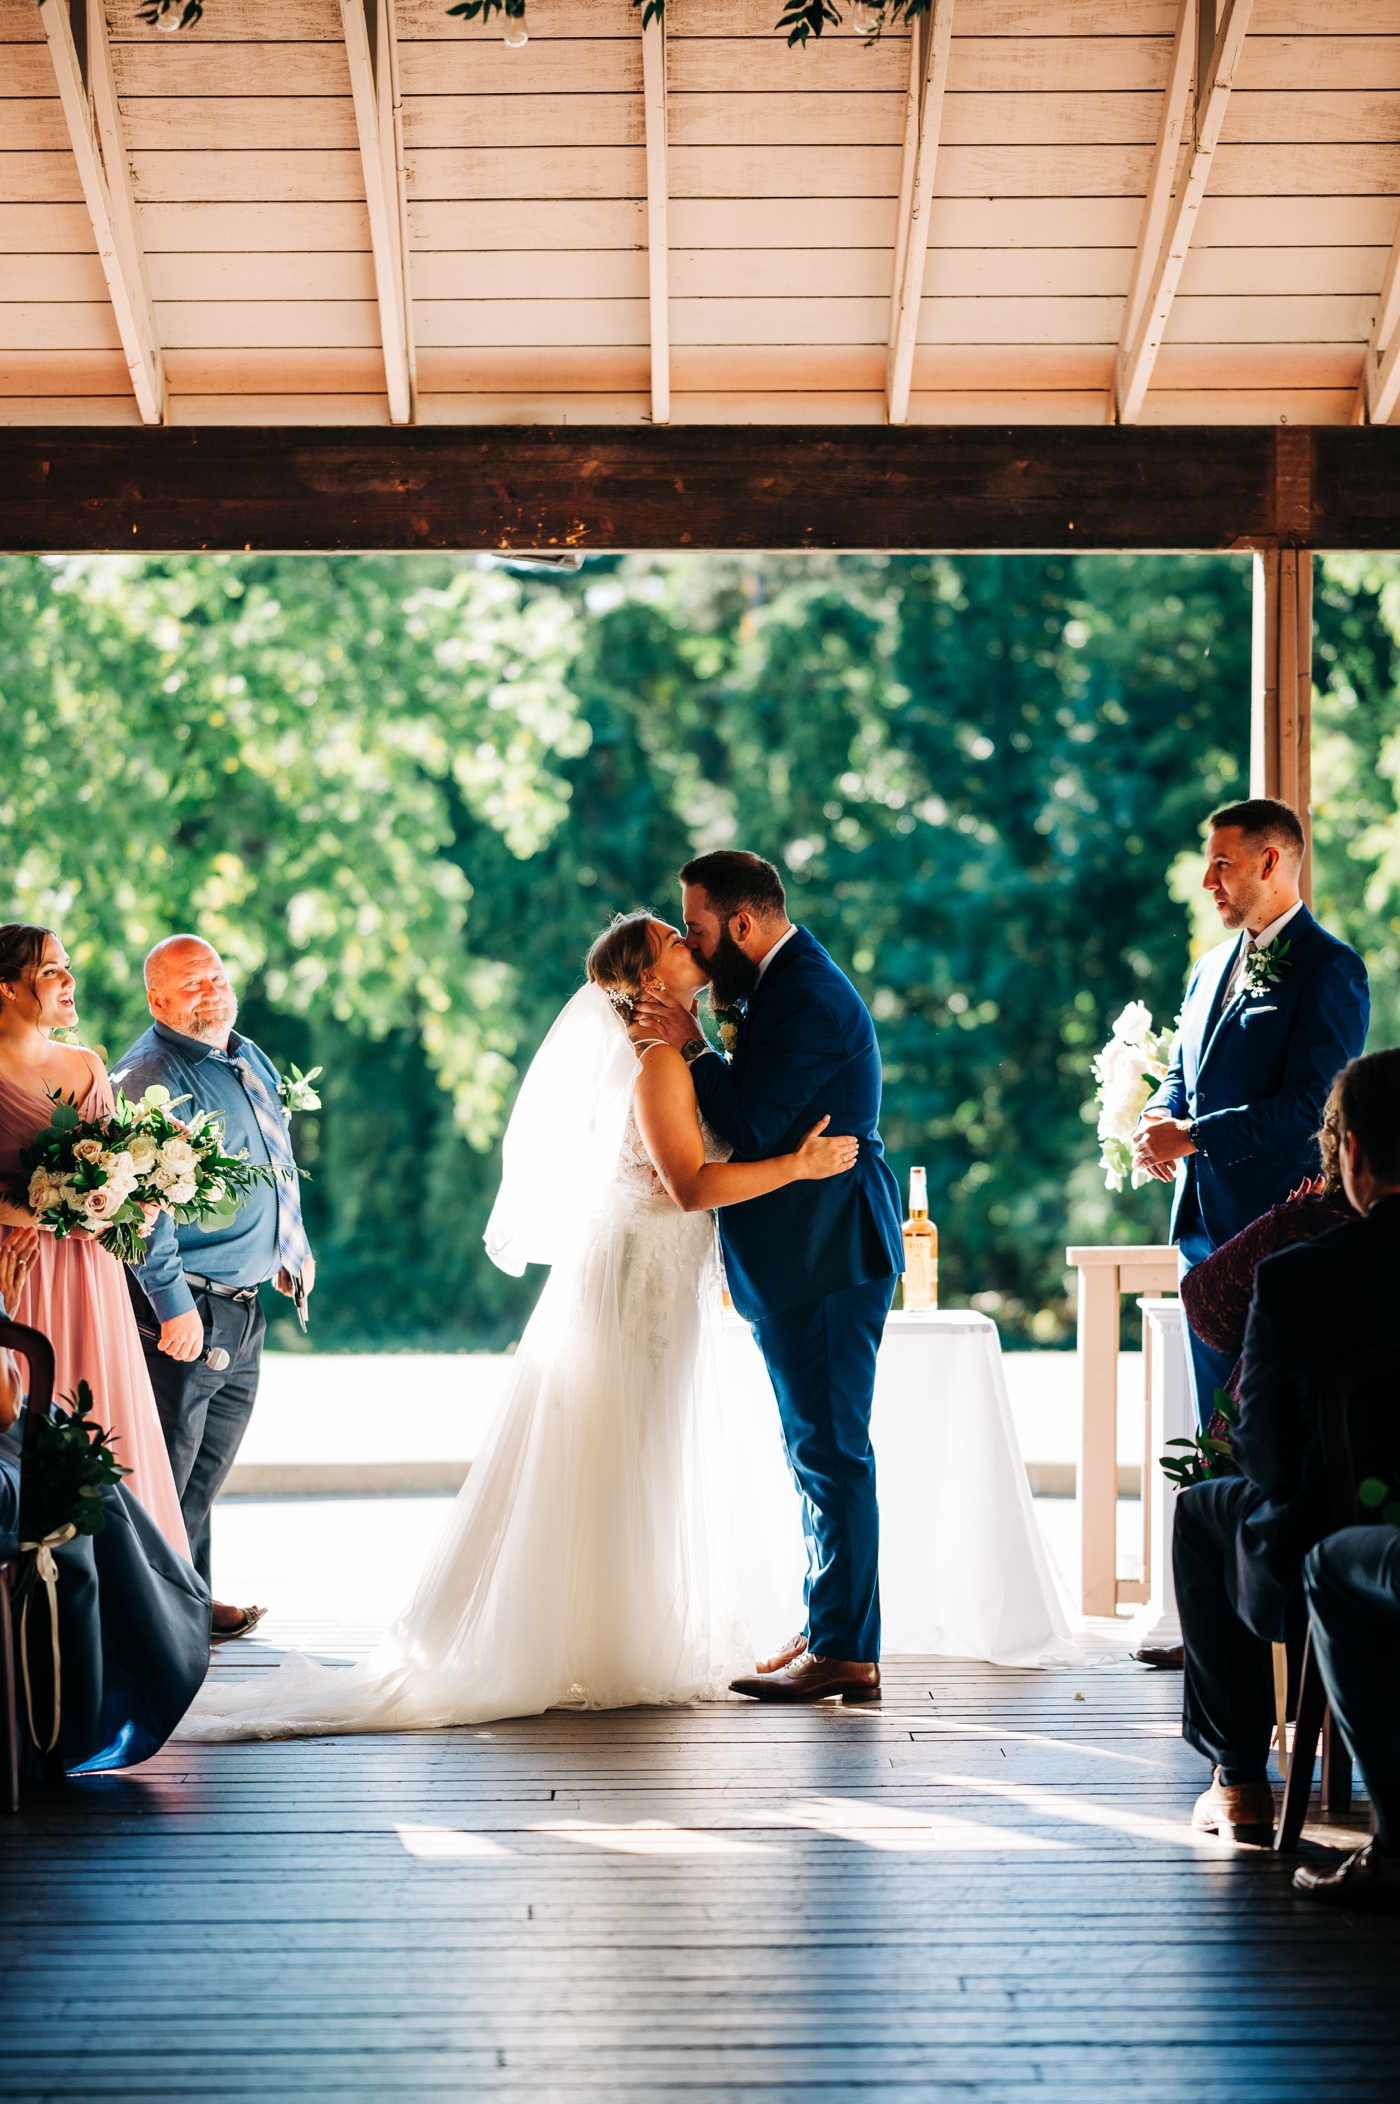 Bride and groom first kiss at wedding ceremony at Pine Knob Carriage House